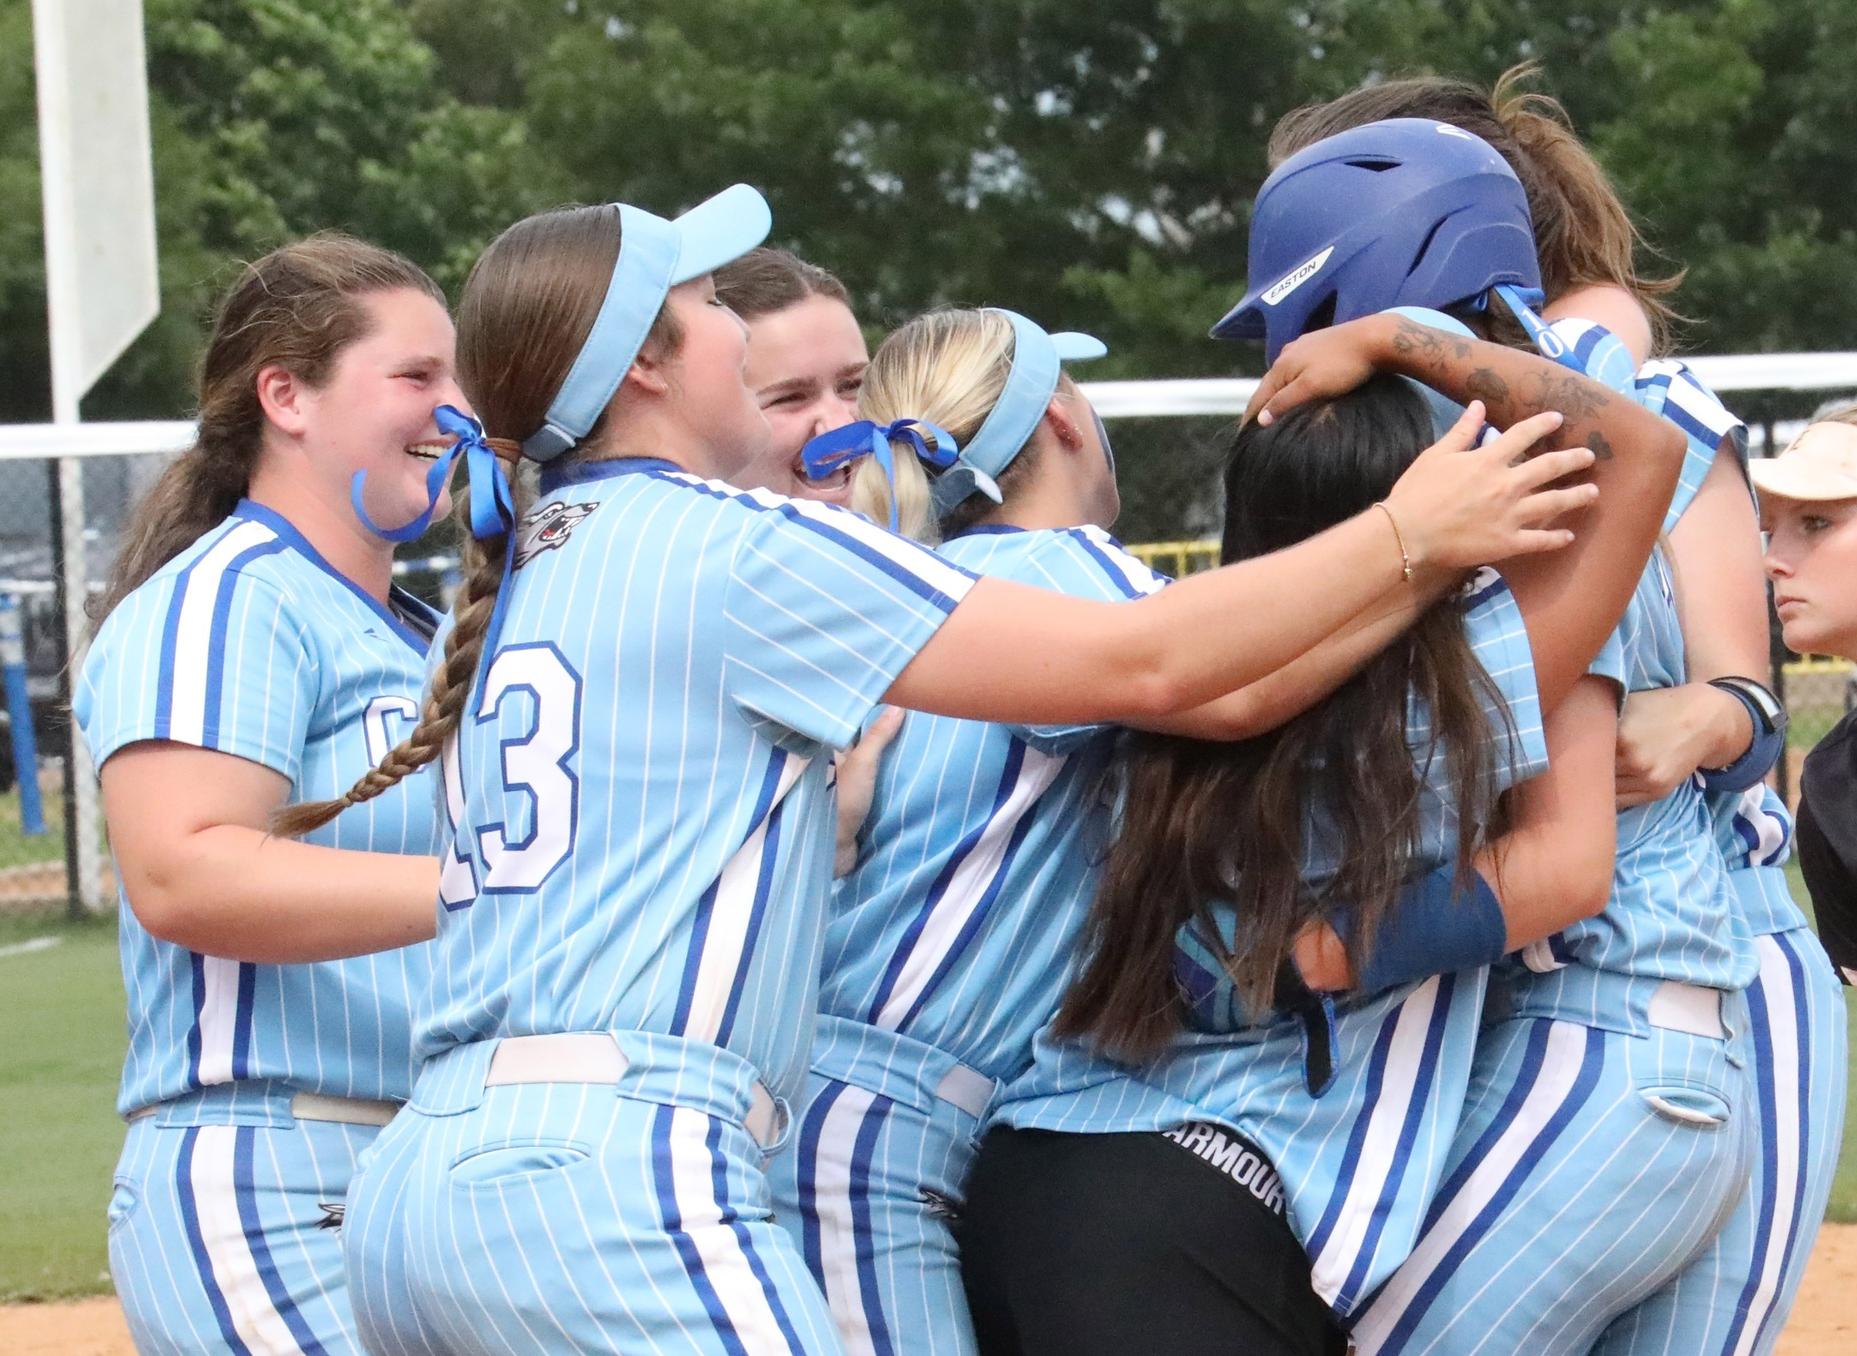 Advance tickets now on sale for NJCAA Region 23 Championship Softball Game